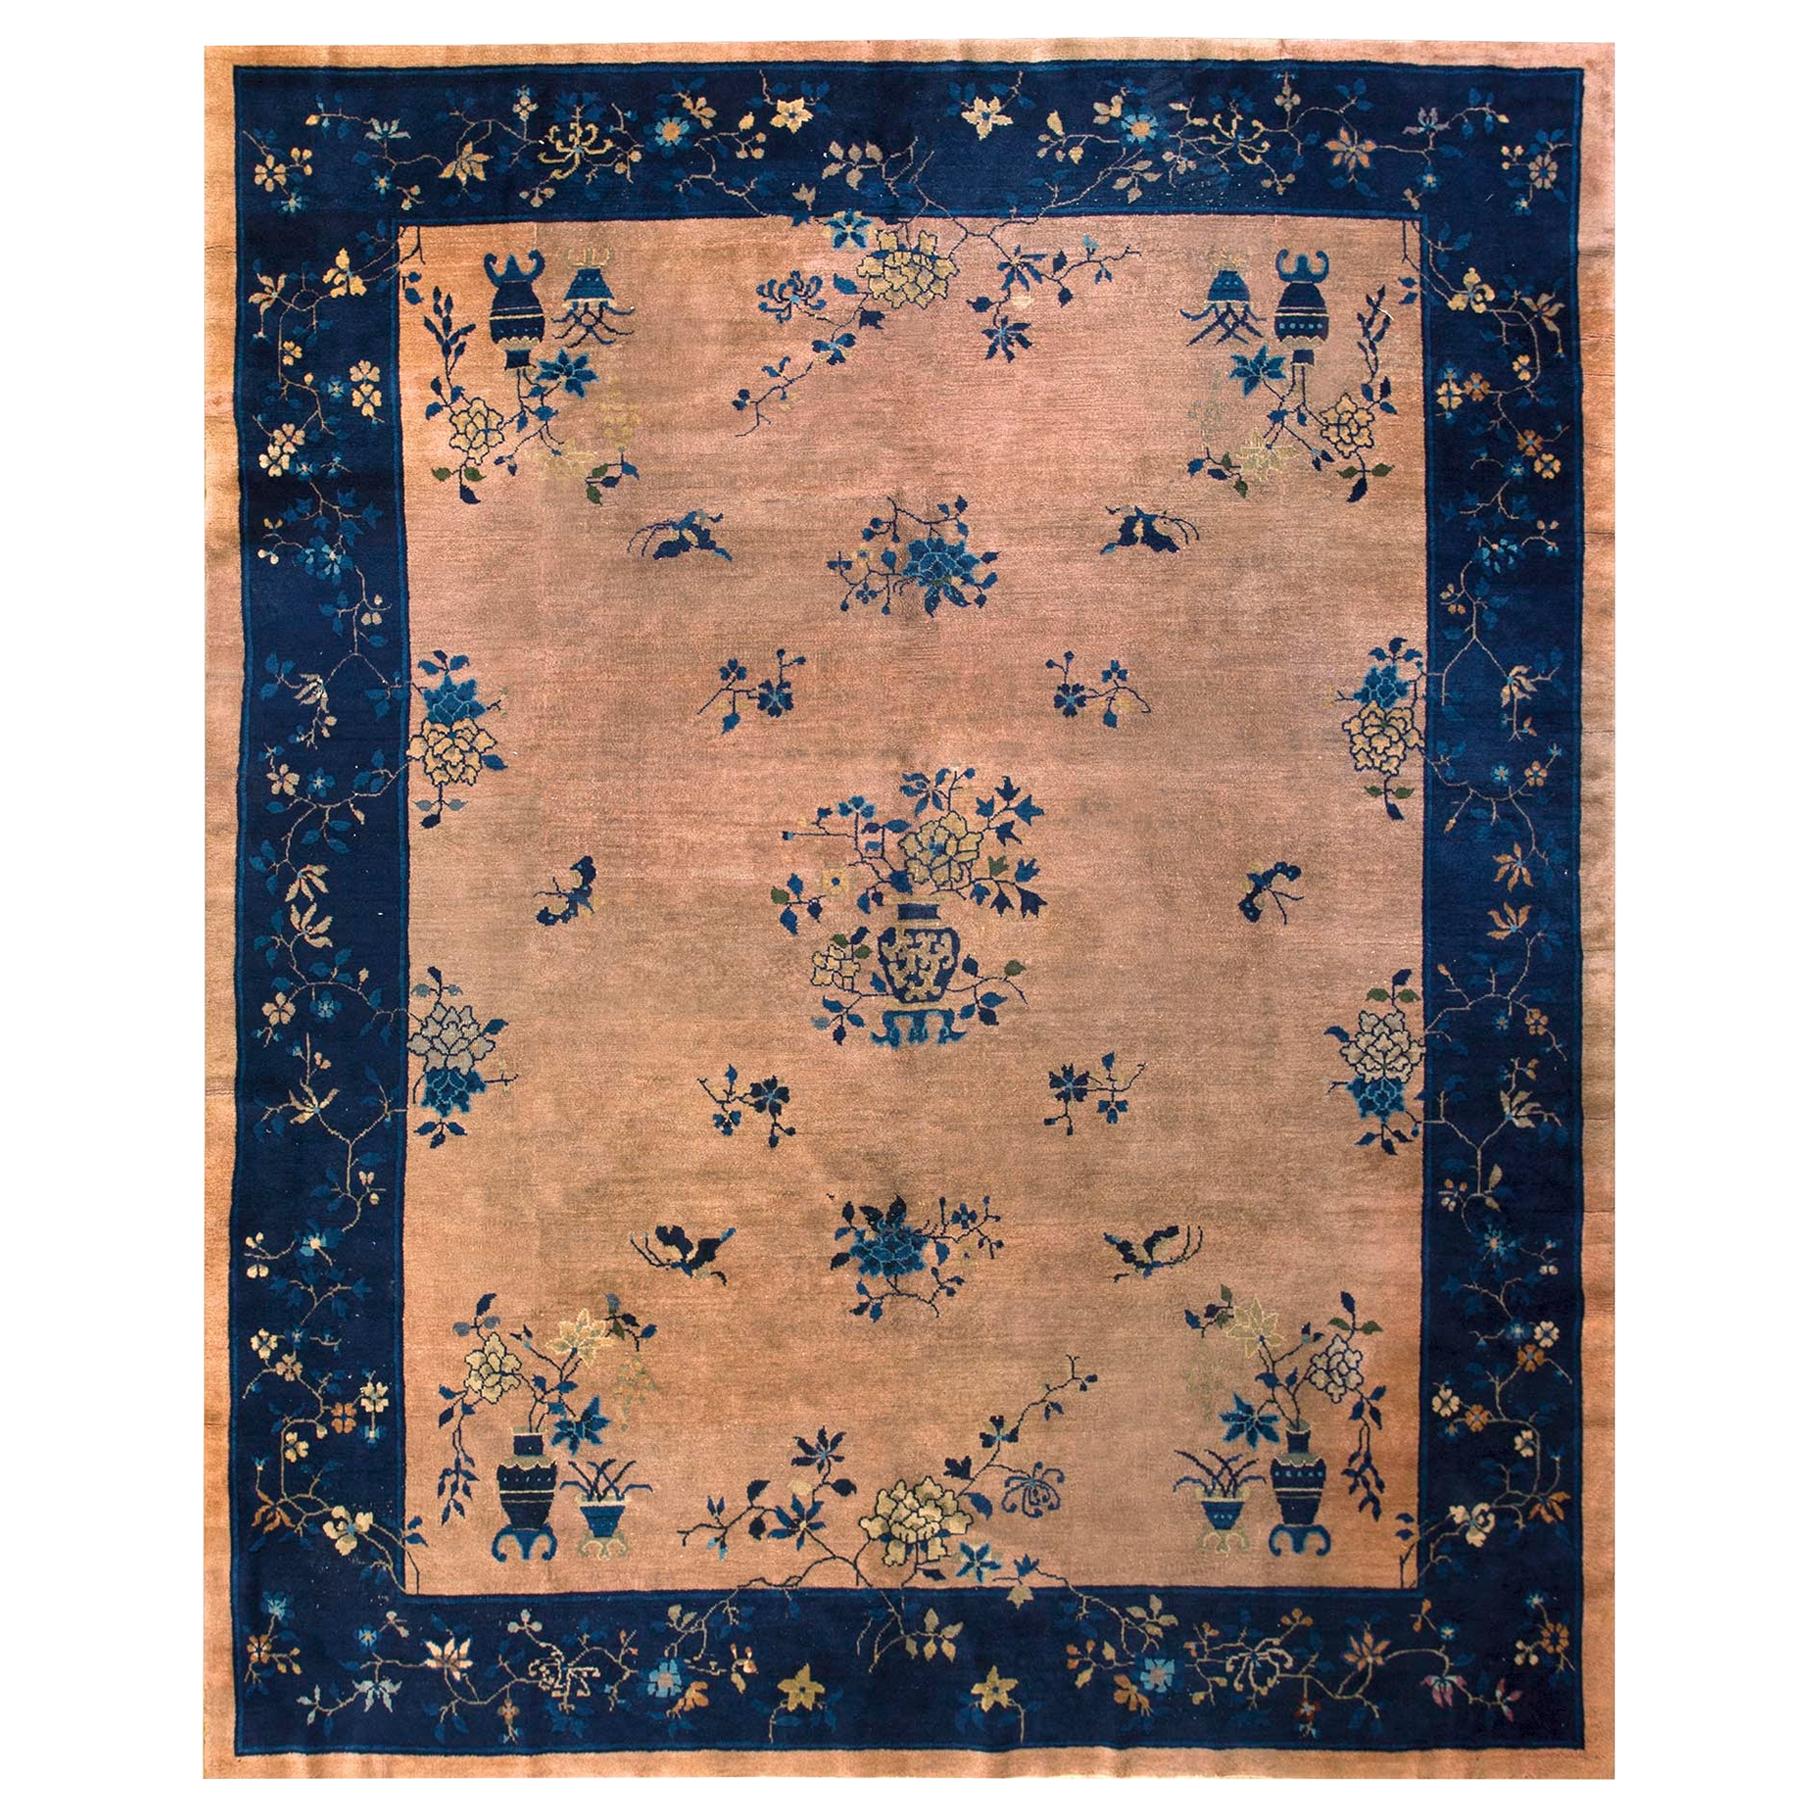 Antique Chinese Peking Rug 9' 3" x 11' 6" For Sale